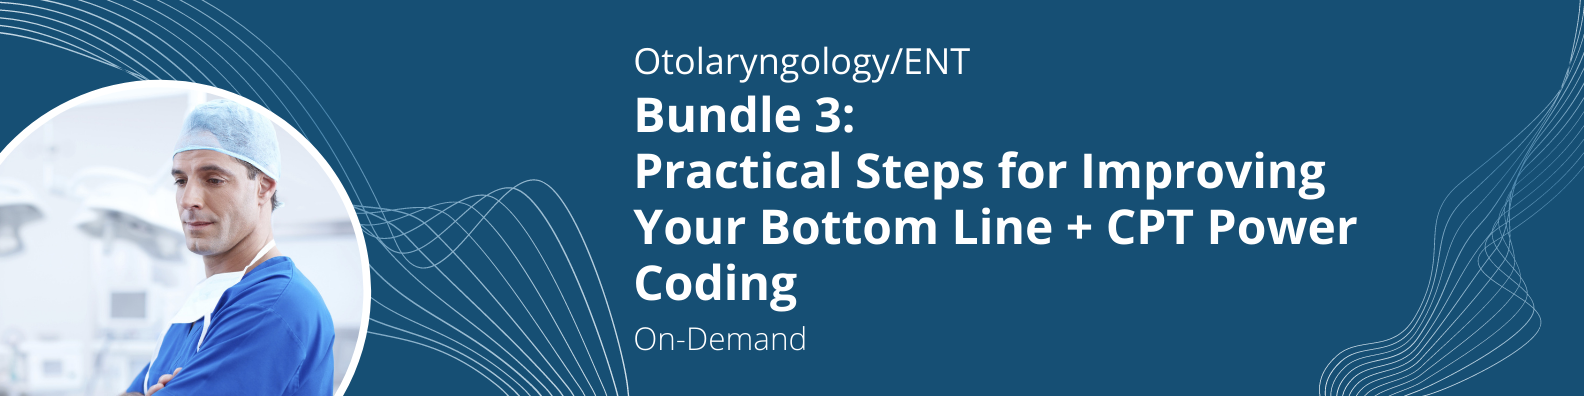 On-Demand - Bundle 3: Practical Steps for Improving Your Bottom Line + CPT Power Coding